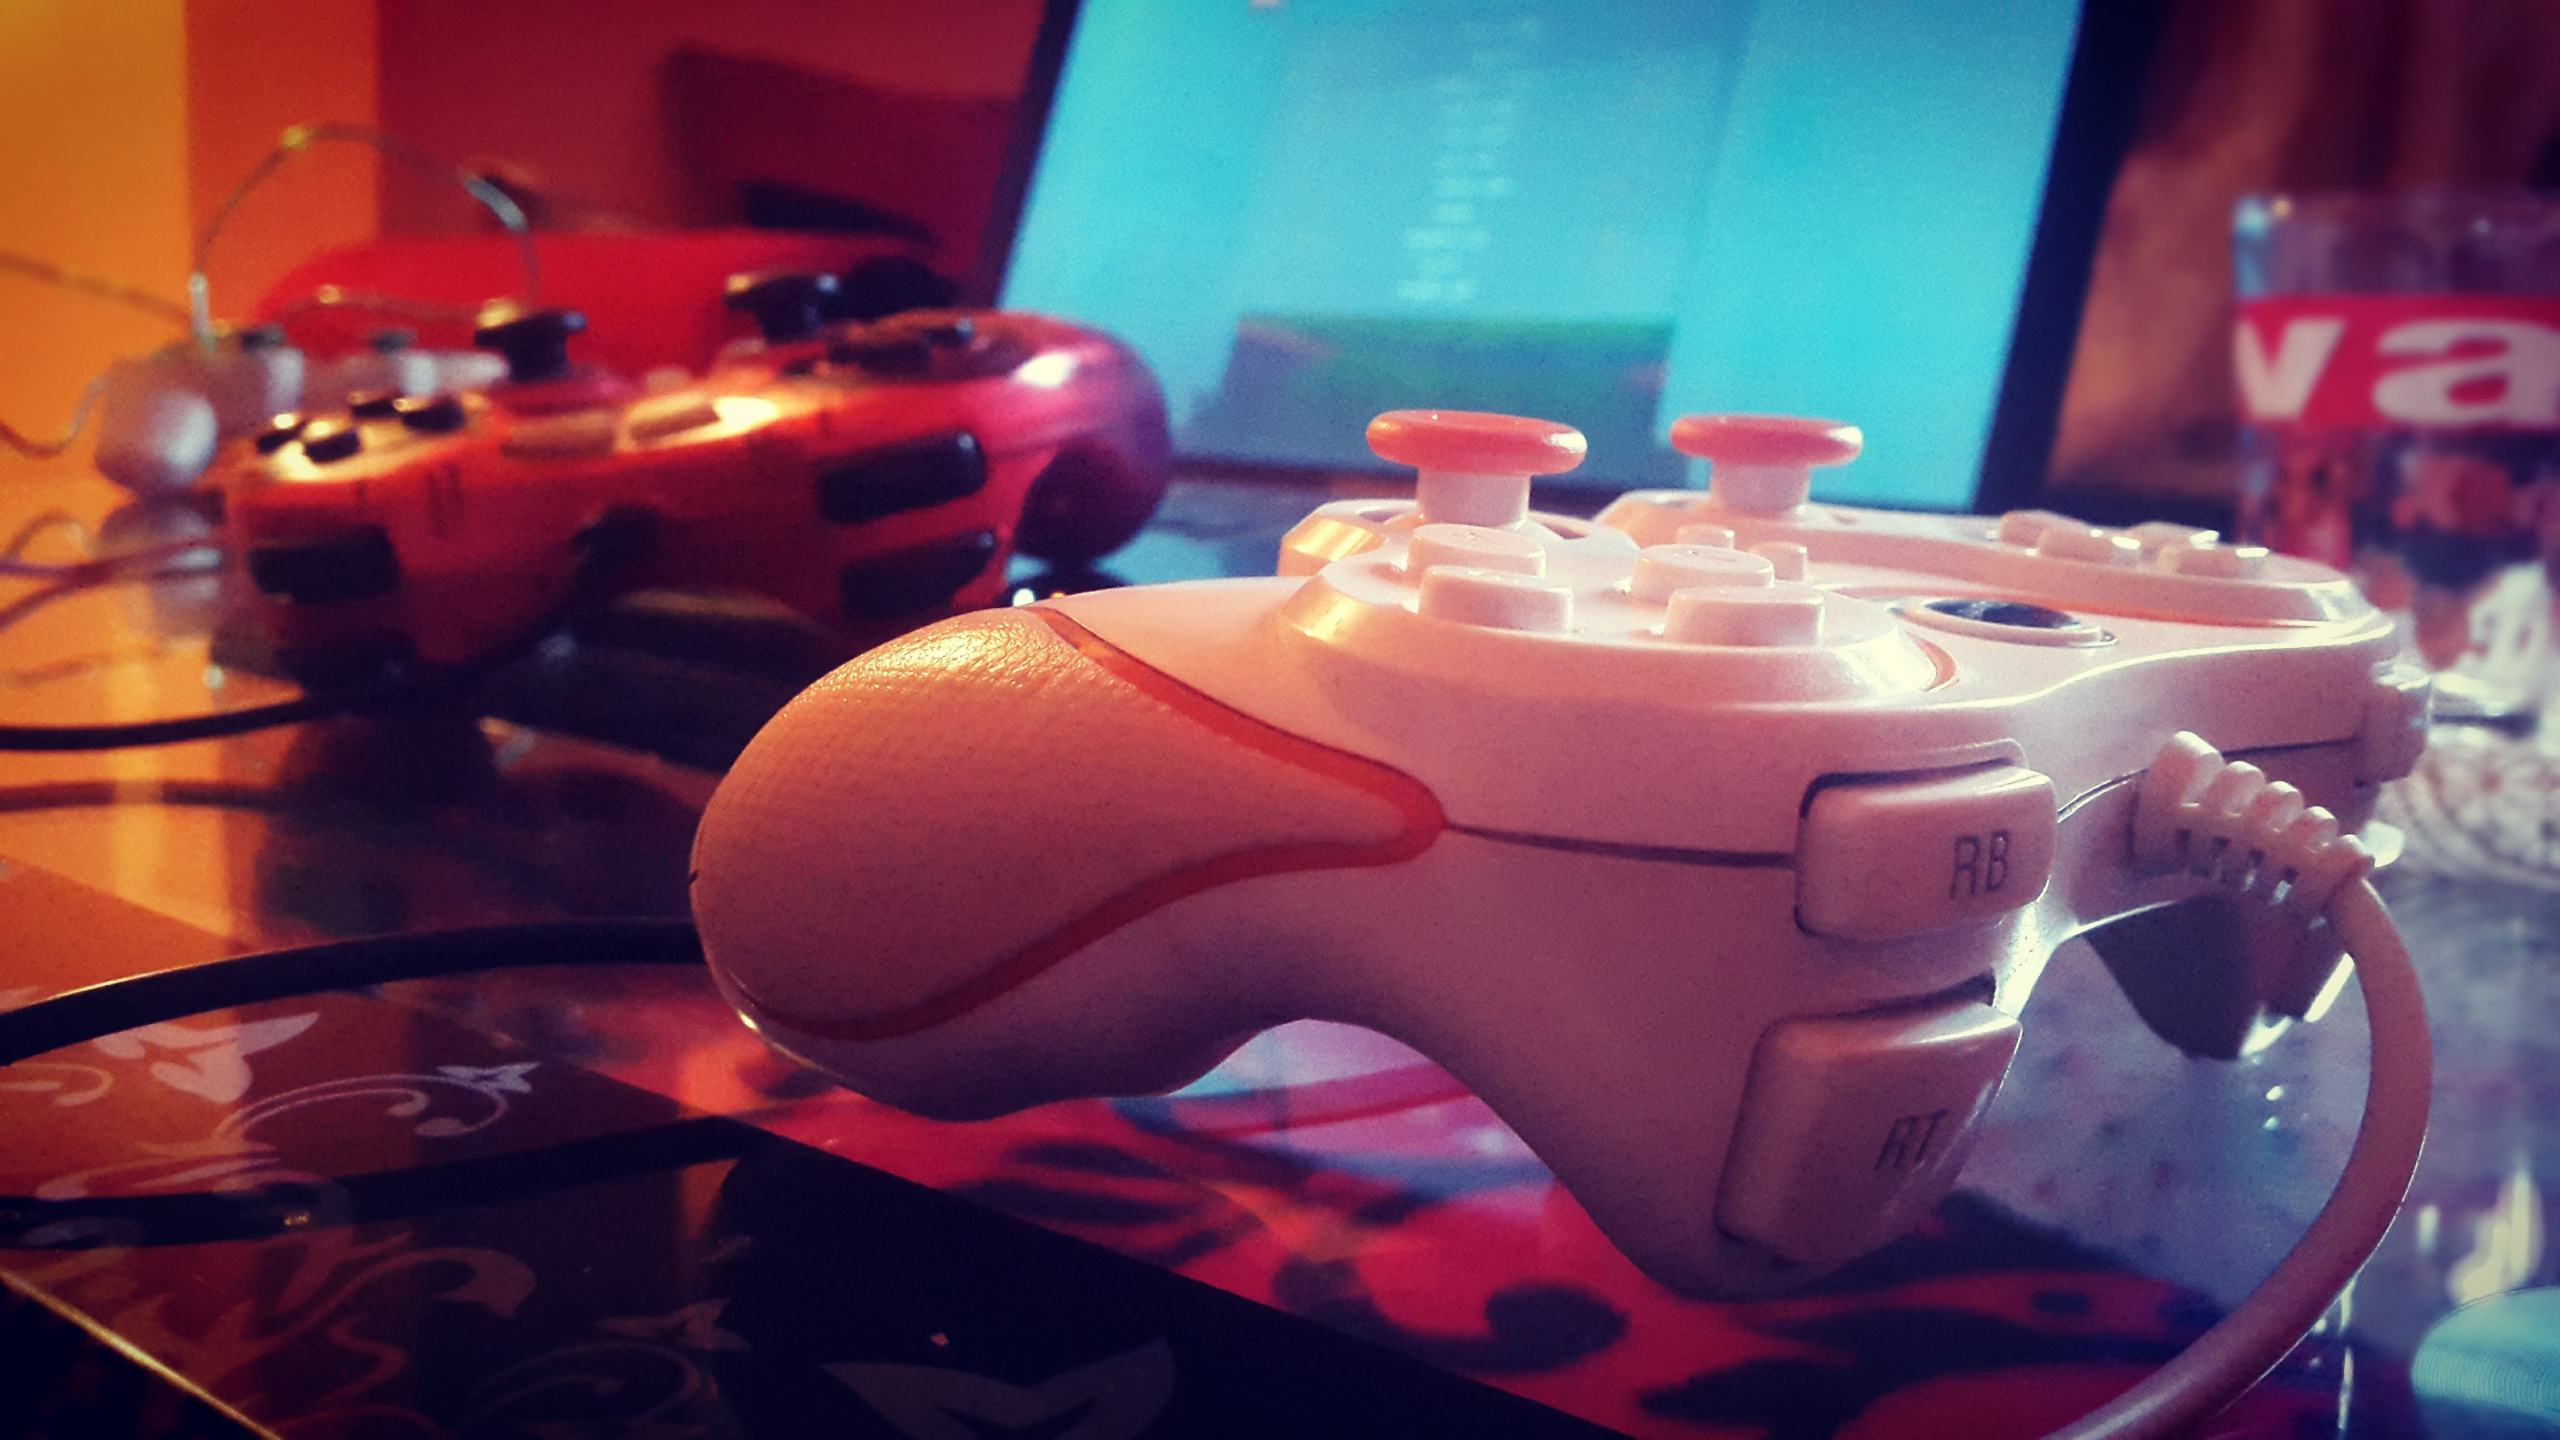 White Game Controller on Brown Wooden Table. Wallpaper in 2560x1440 Resolution